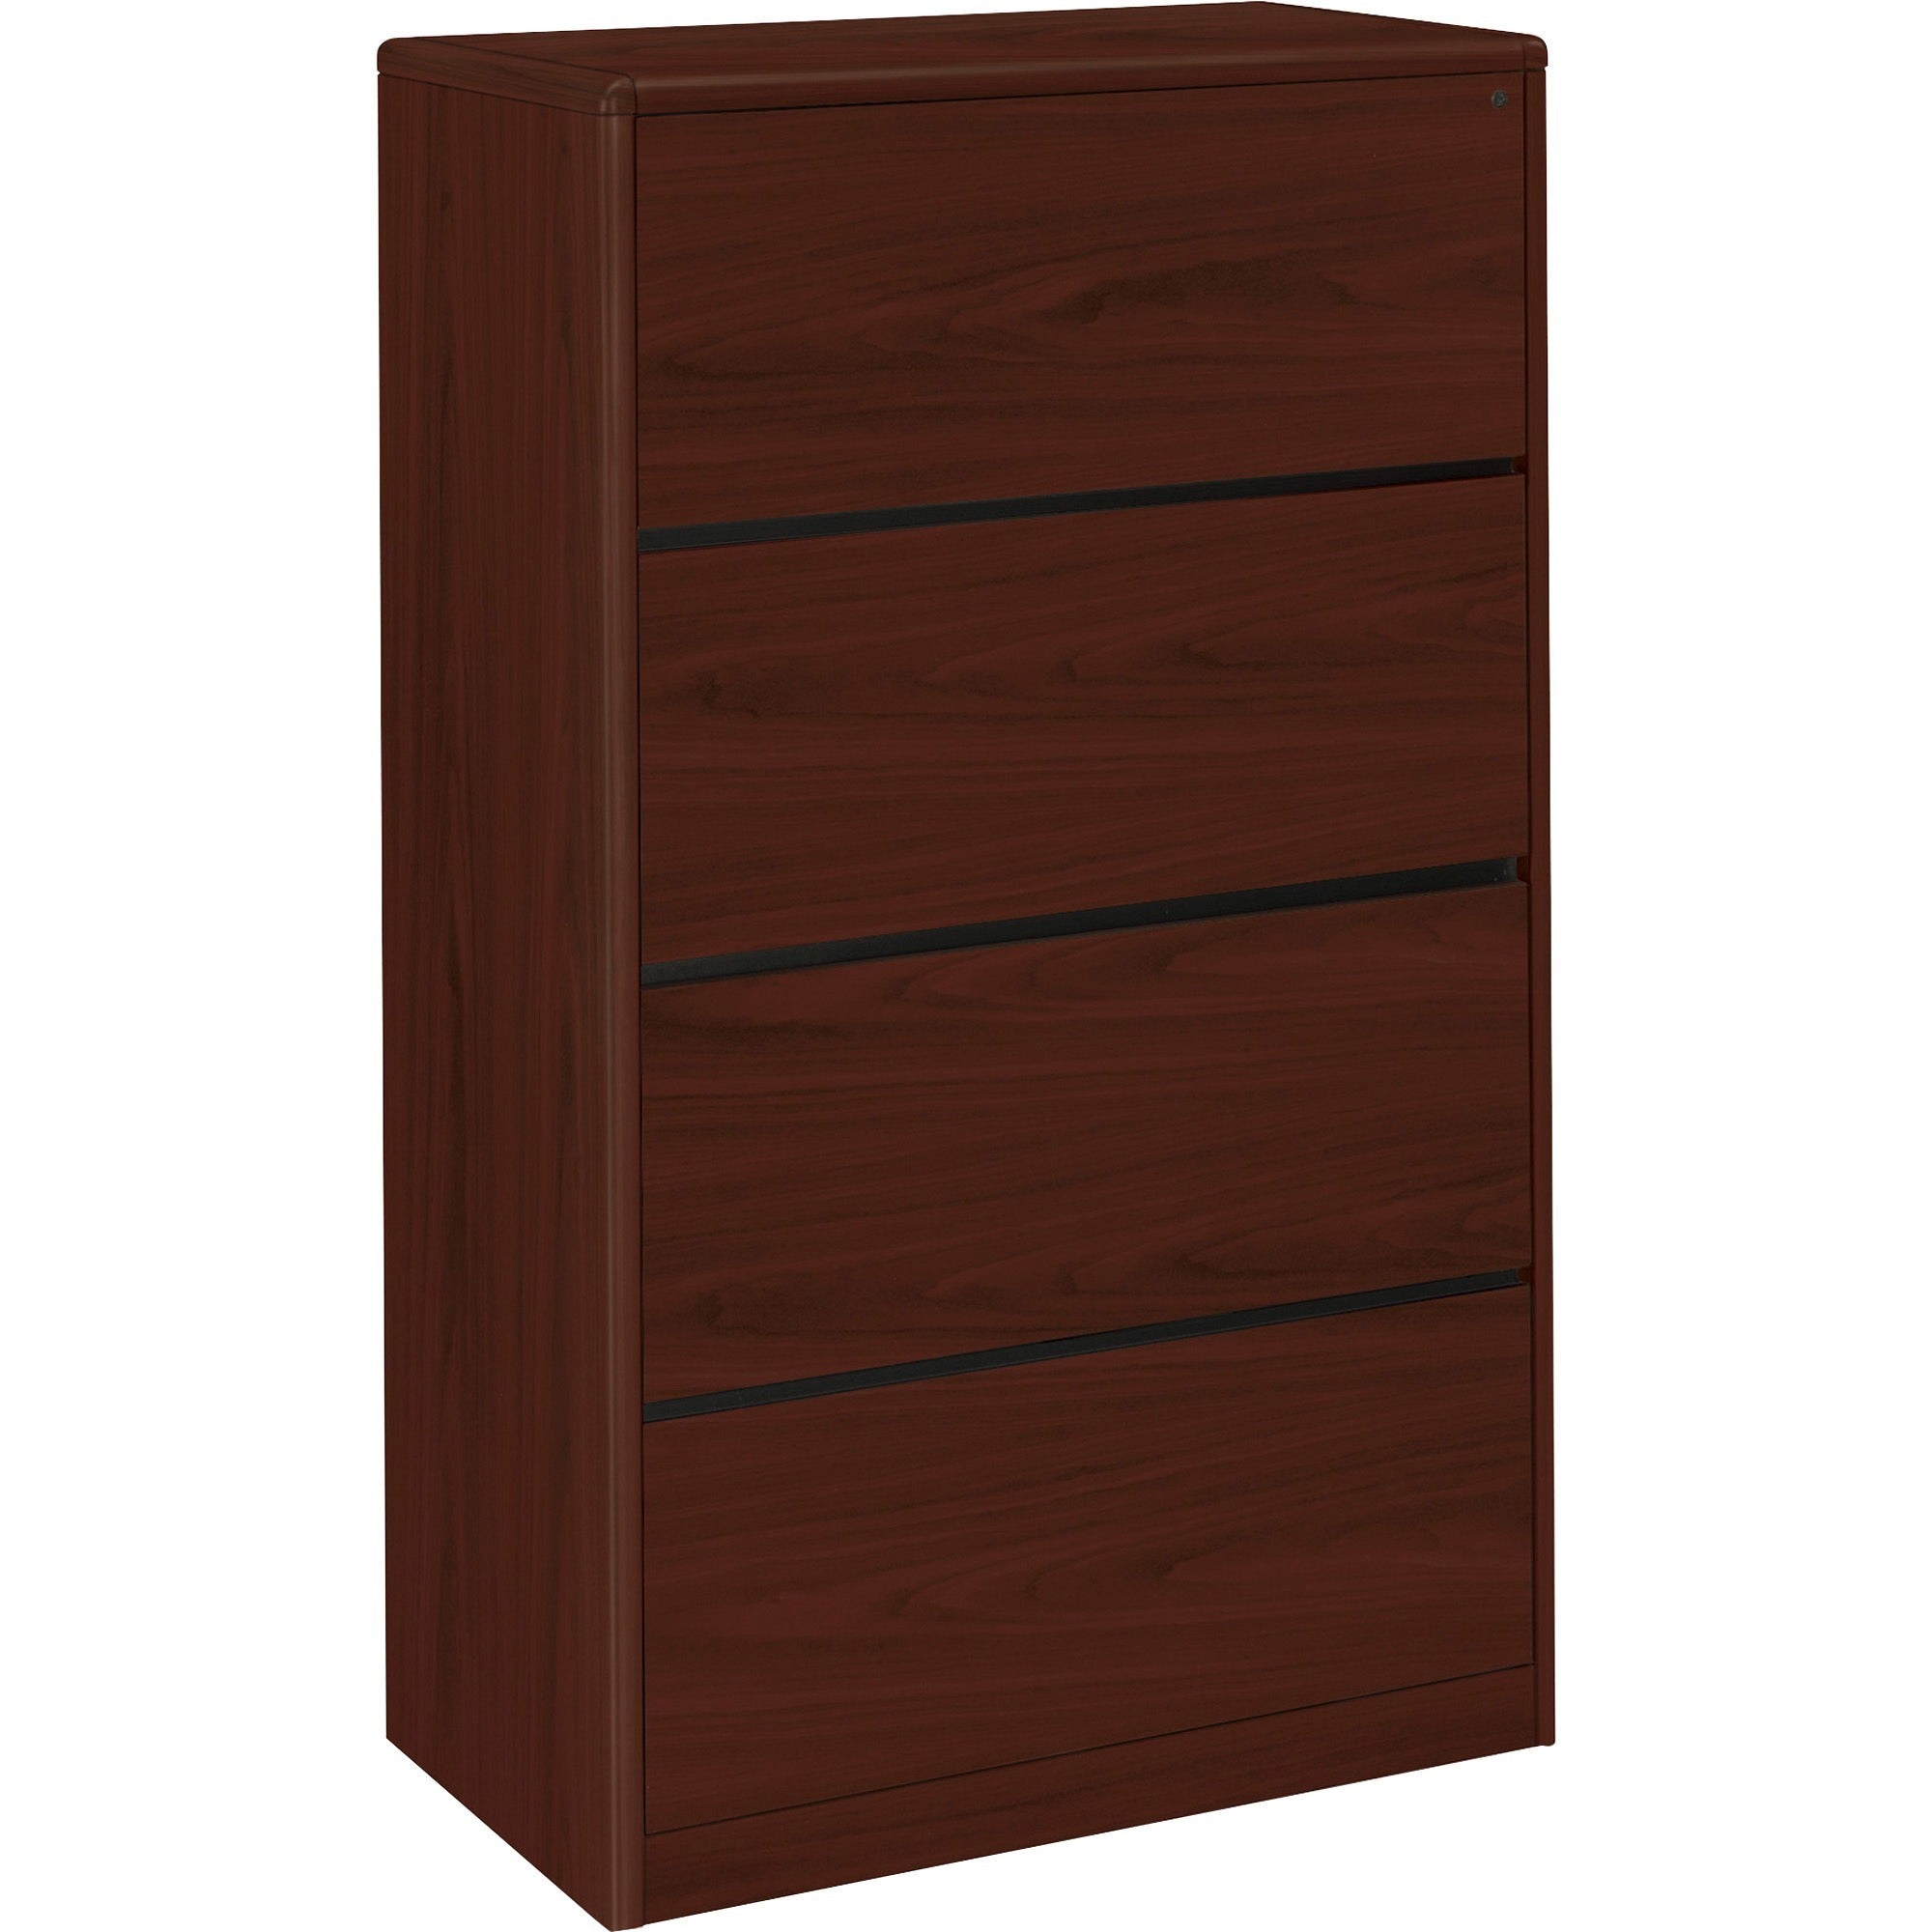 HON 10700 Series Lateral File 4 Drawers - 36" x 20"59.1" - 4 Drawer(s) - Waterfall Edge - Material: Laminate - Finish: Mahogany - For Office - 